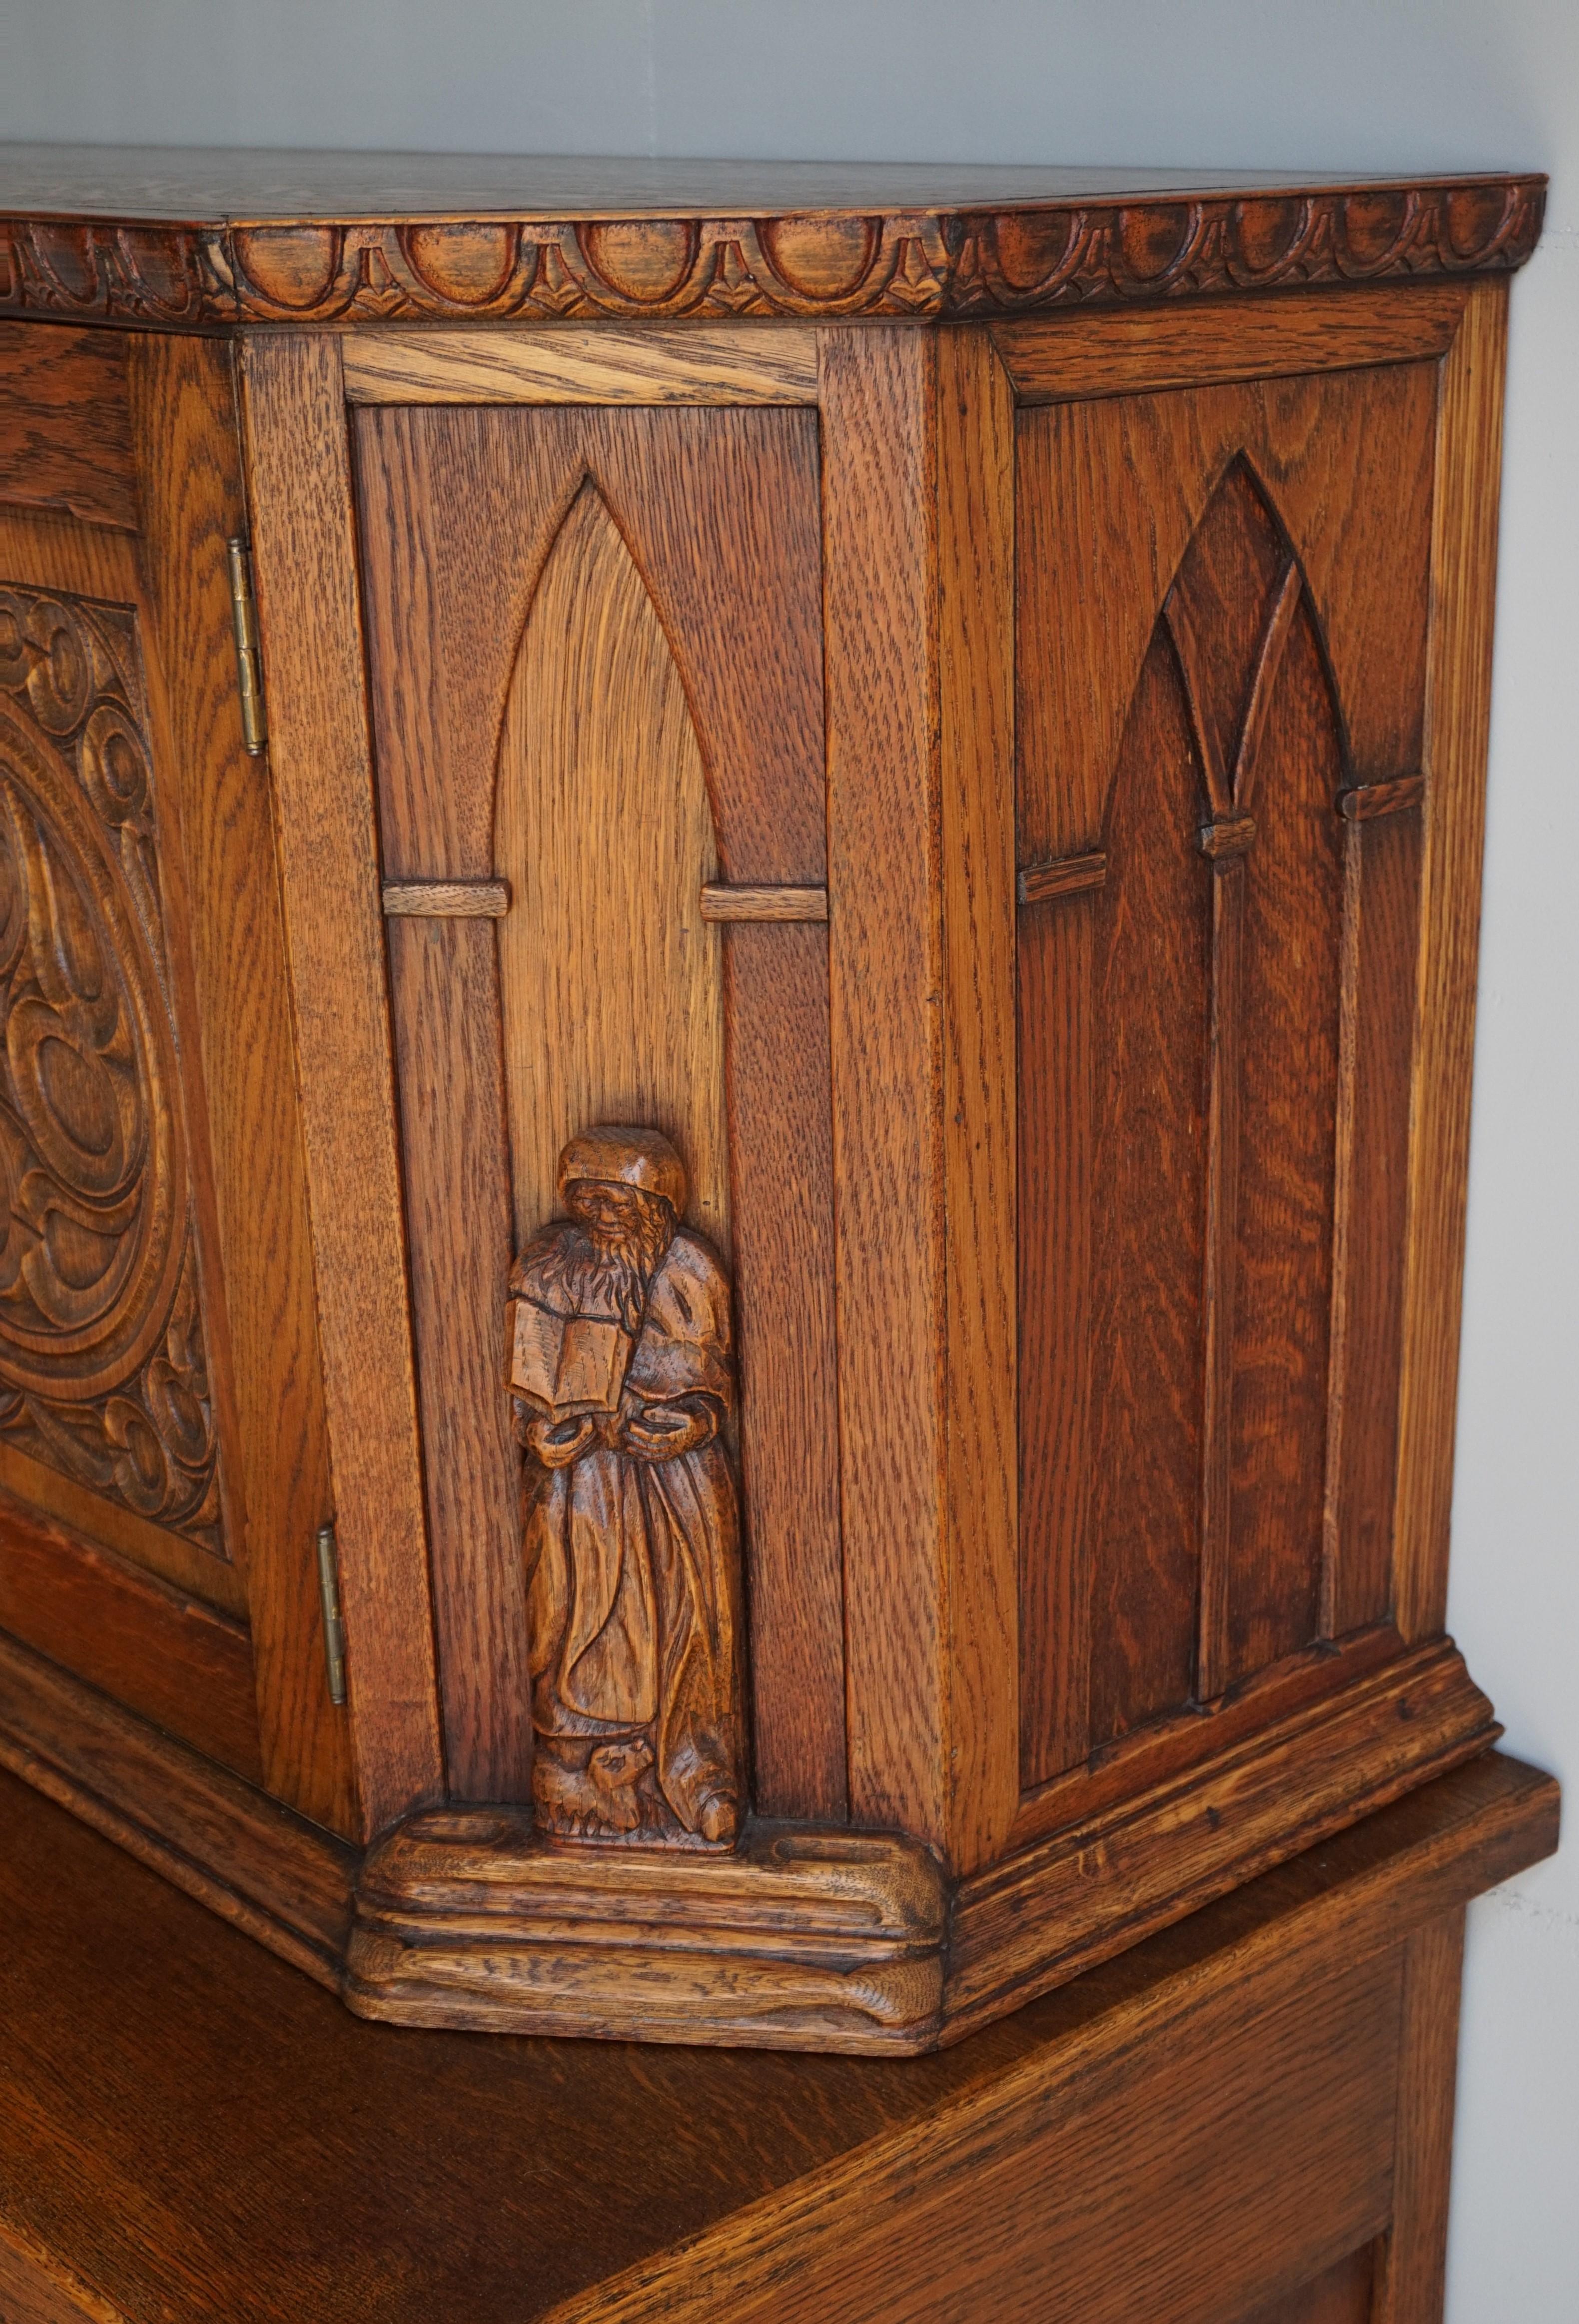 One of a kind and beautifully hand carved Gothic cabinet.

This good size and fully handcrafted cabinet comes with a wide variety of perfectly hand carved Gothic Style elements which gives it its rich and impressive look and feel. The monks on